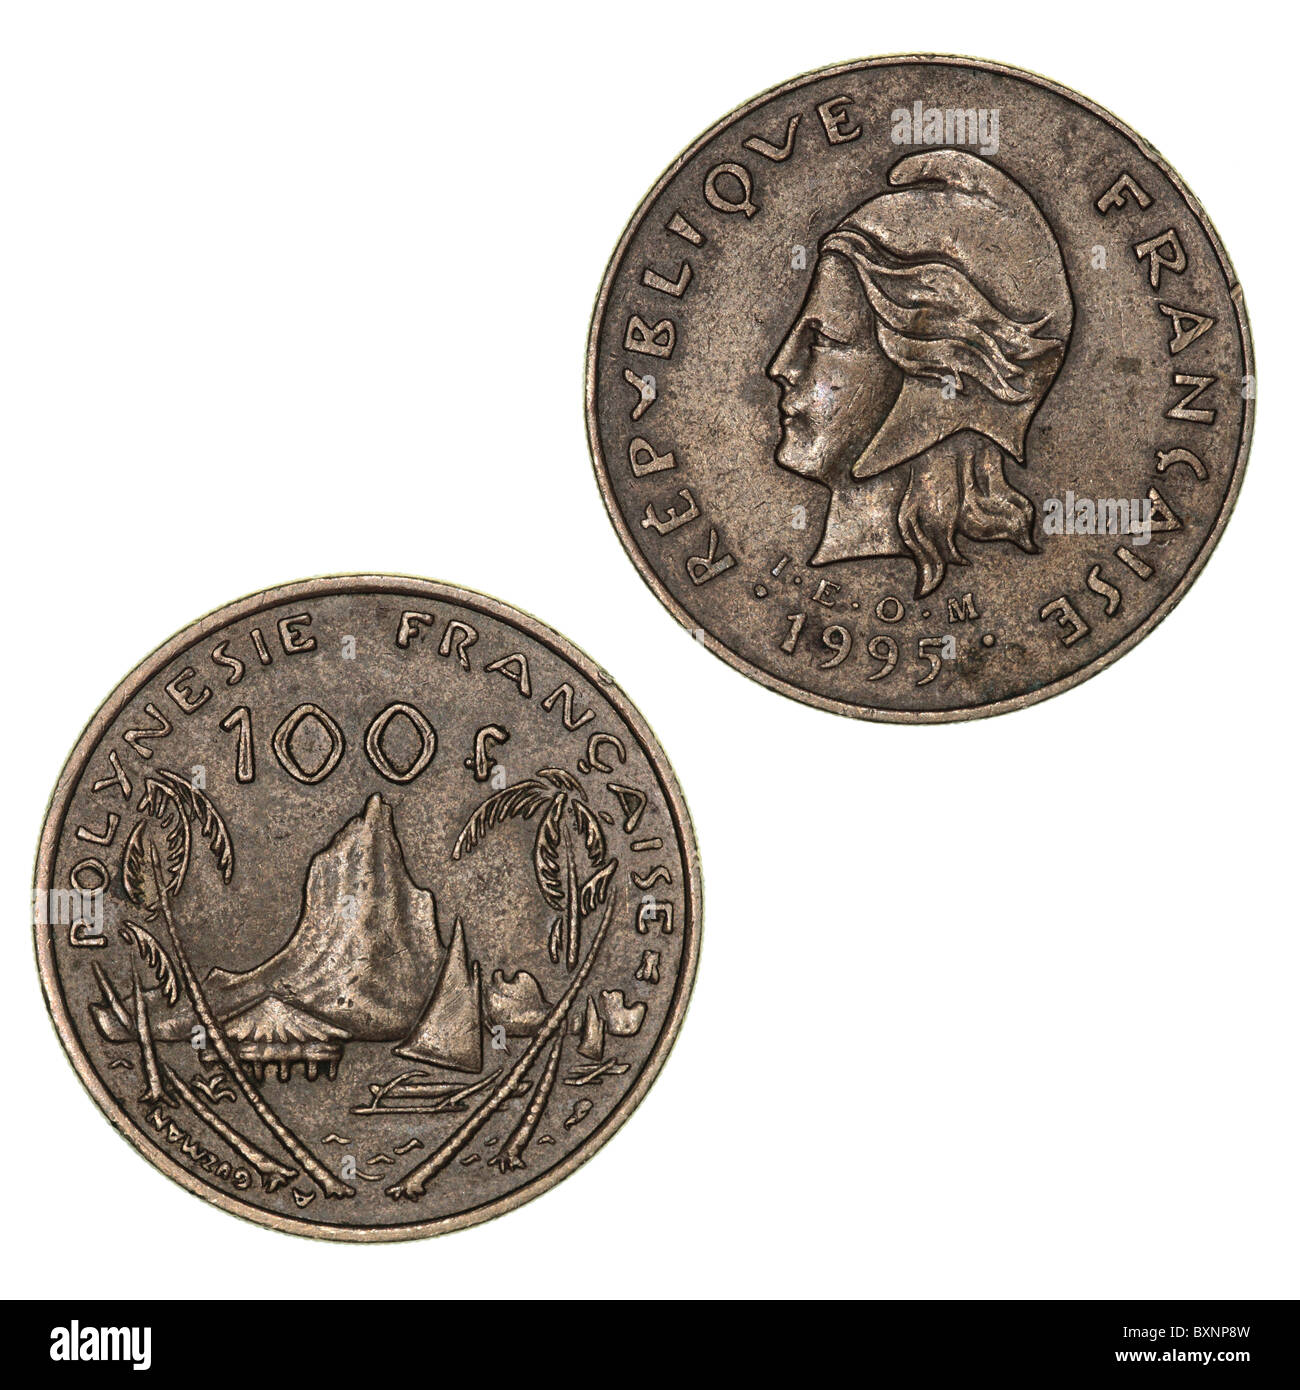 New Caledonia 100F coin with a Marianne head (obverse) engraved by R. Joly and Moorea Harbor (reverse) designed by A. Guzman-Nageotte Stock Photo